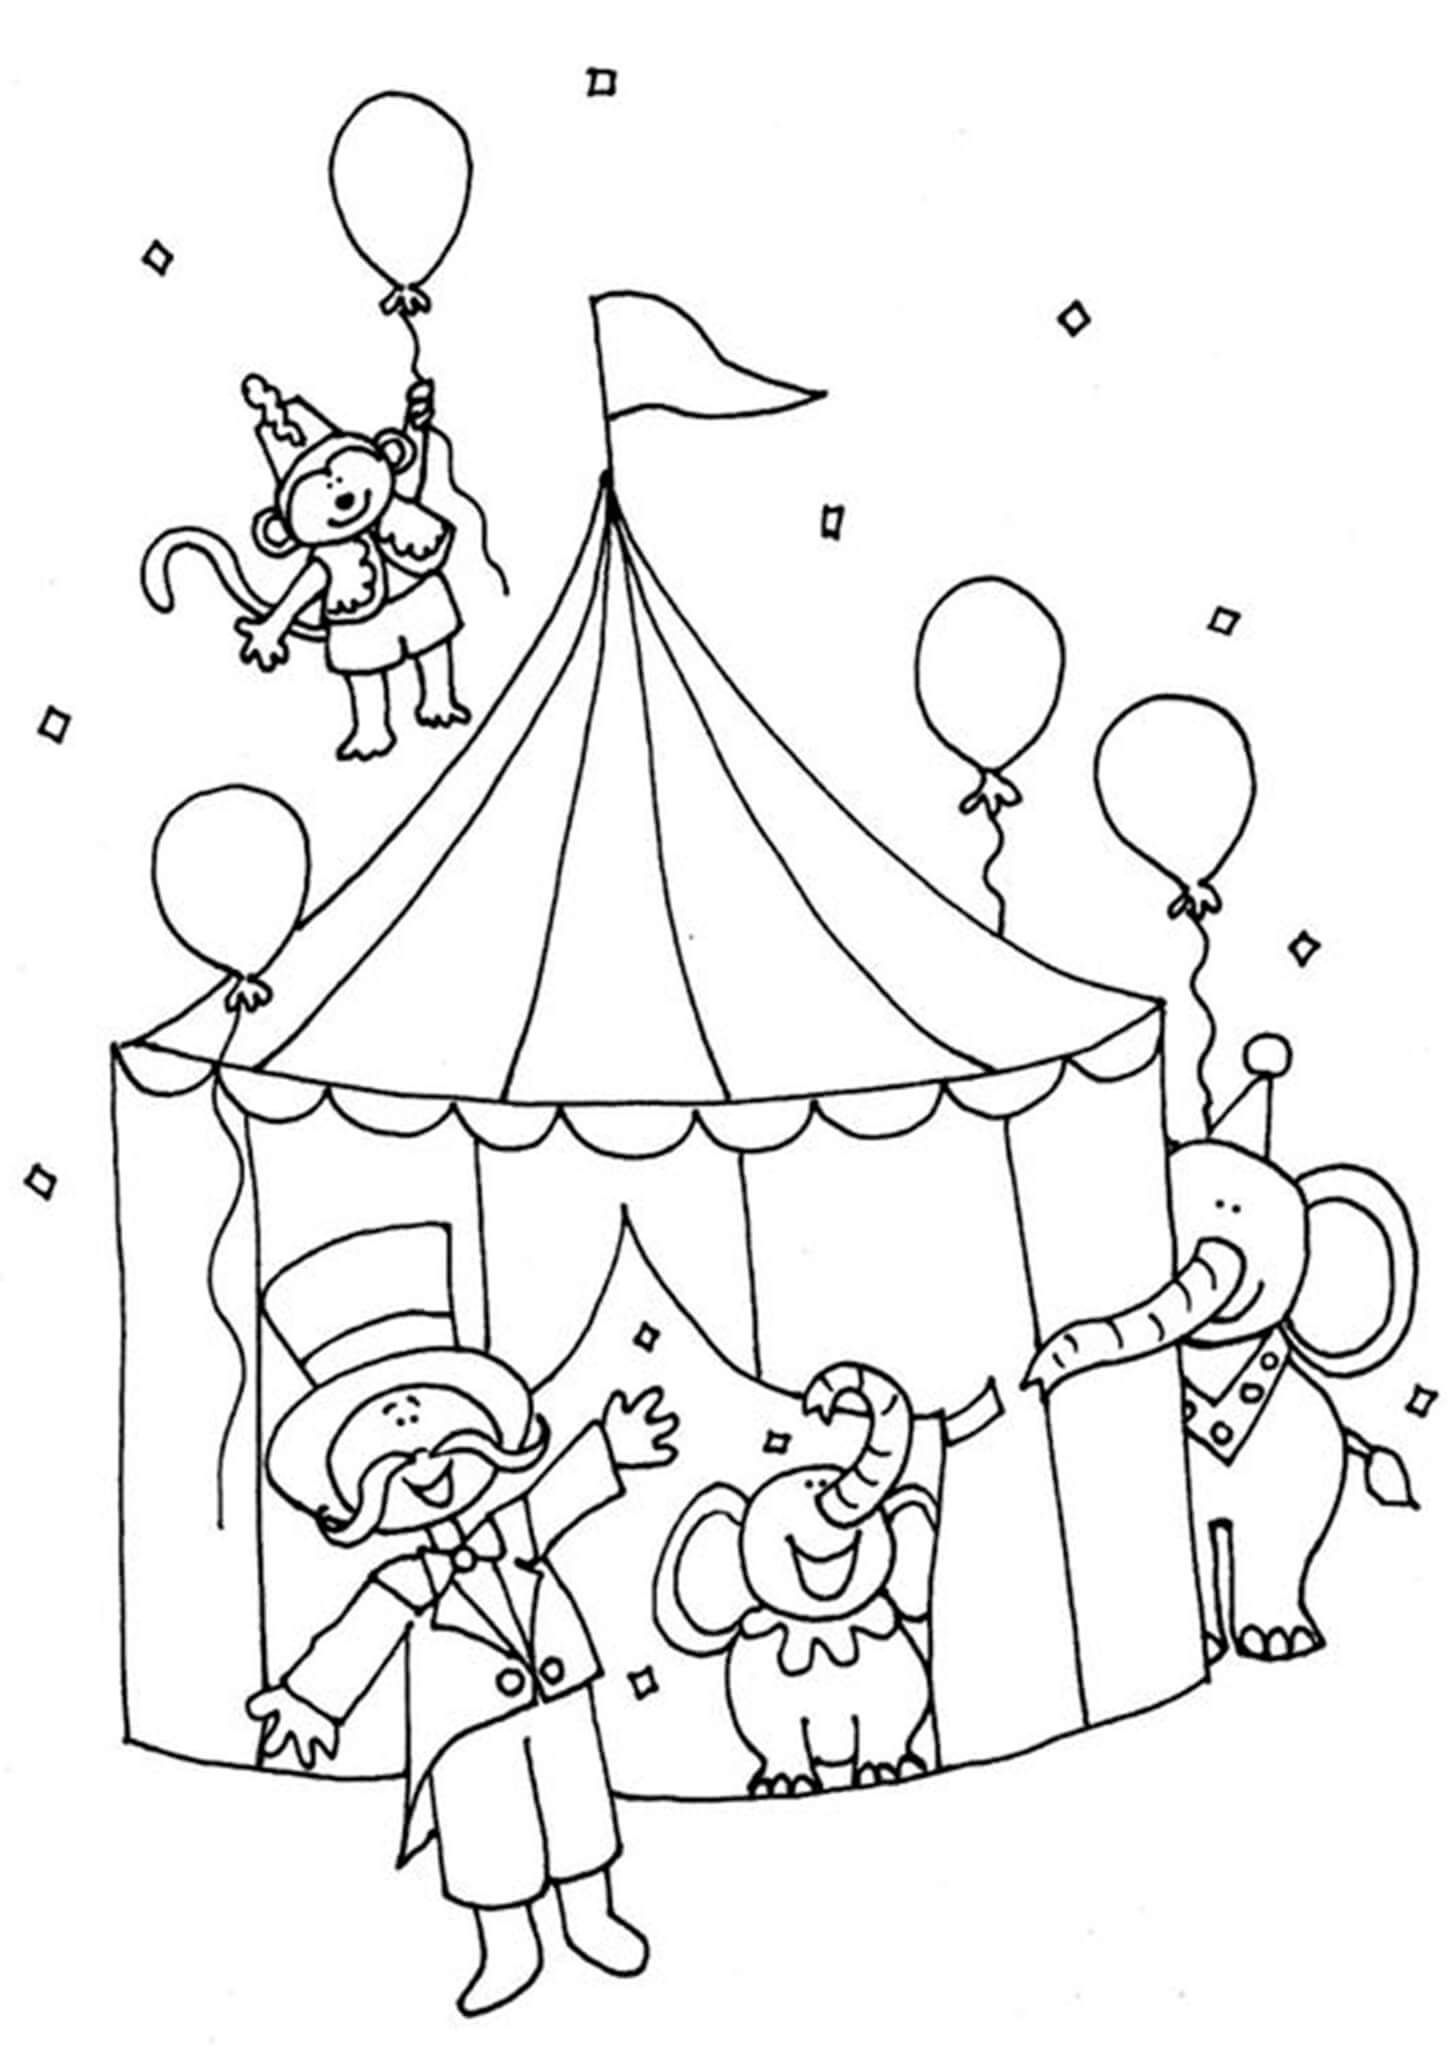 Free easy to print circus coloring pages coloring pages kindergarten coloring pages coloring book pages